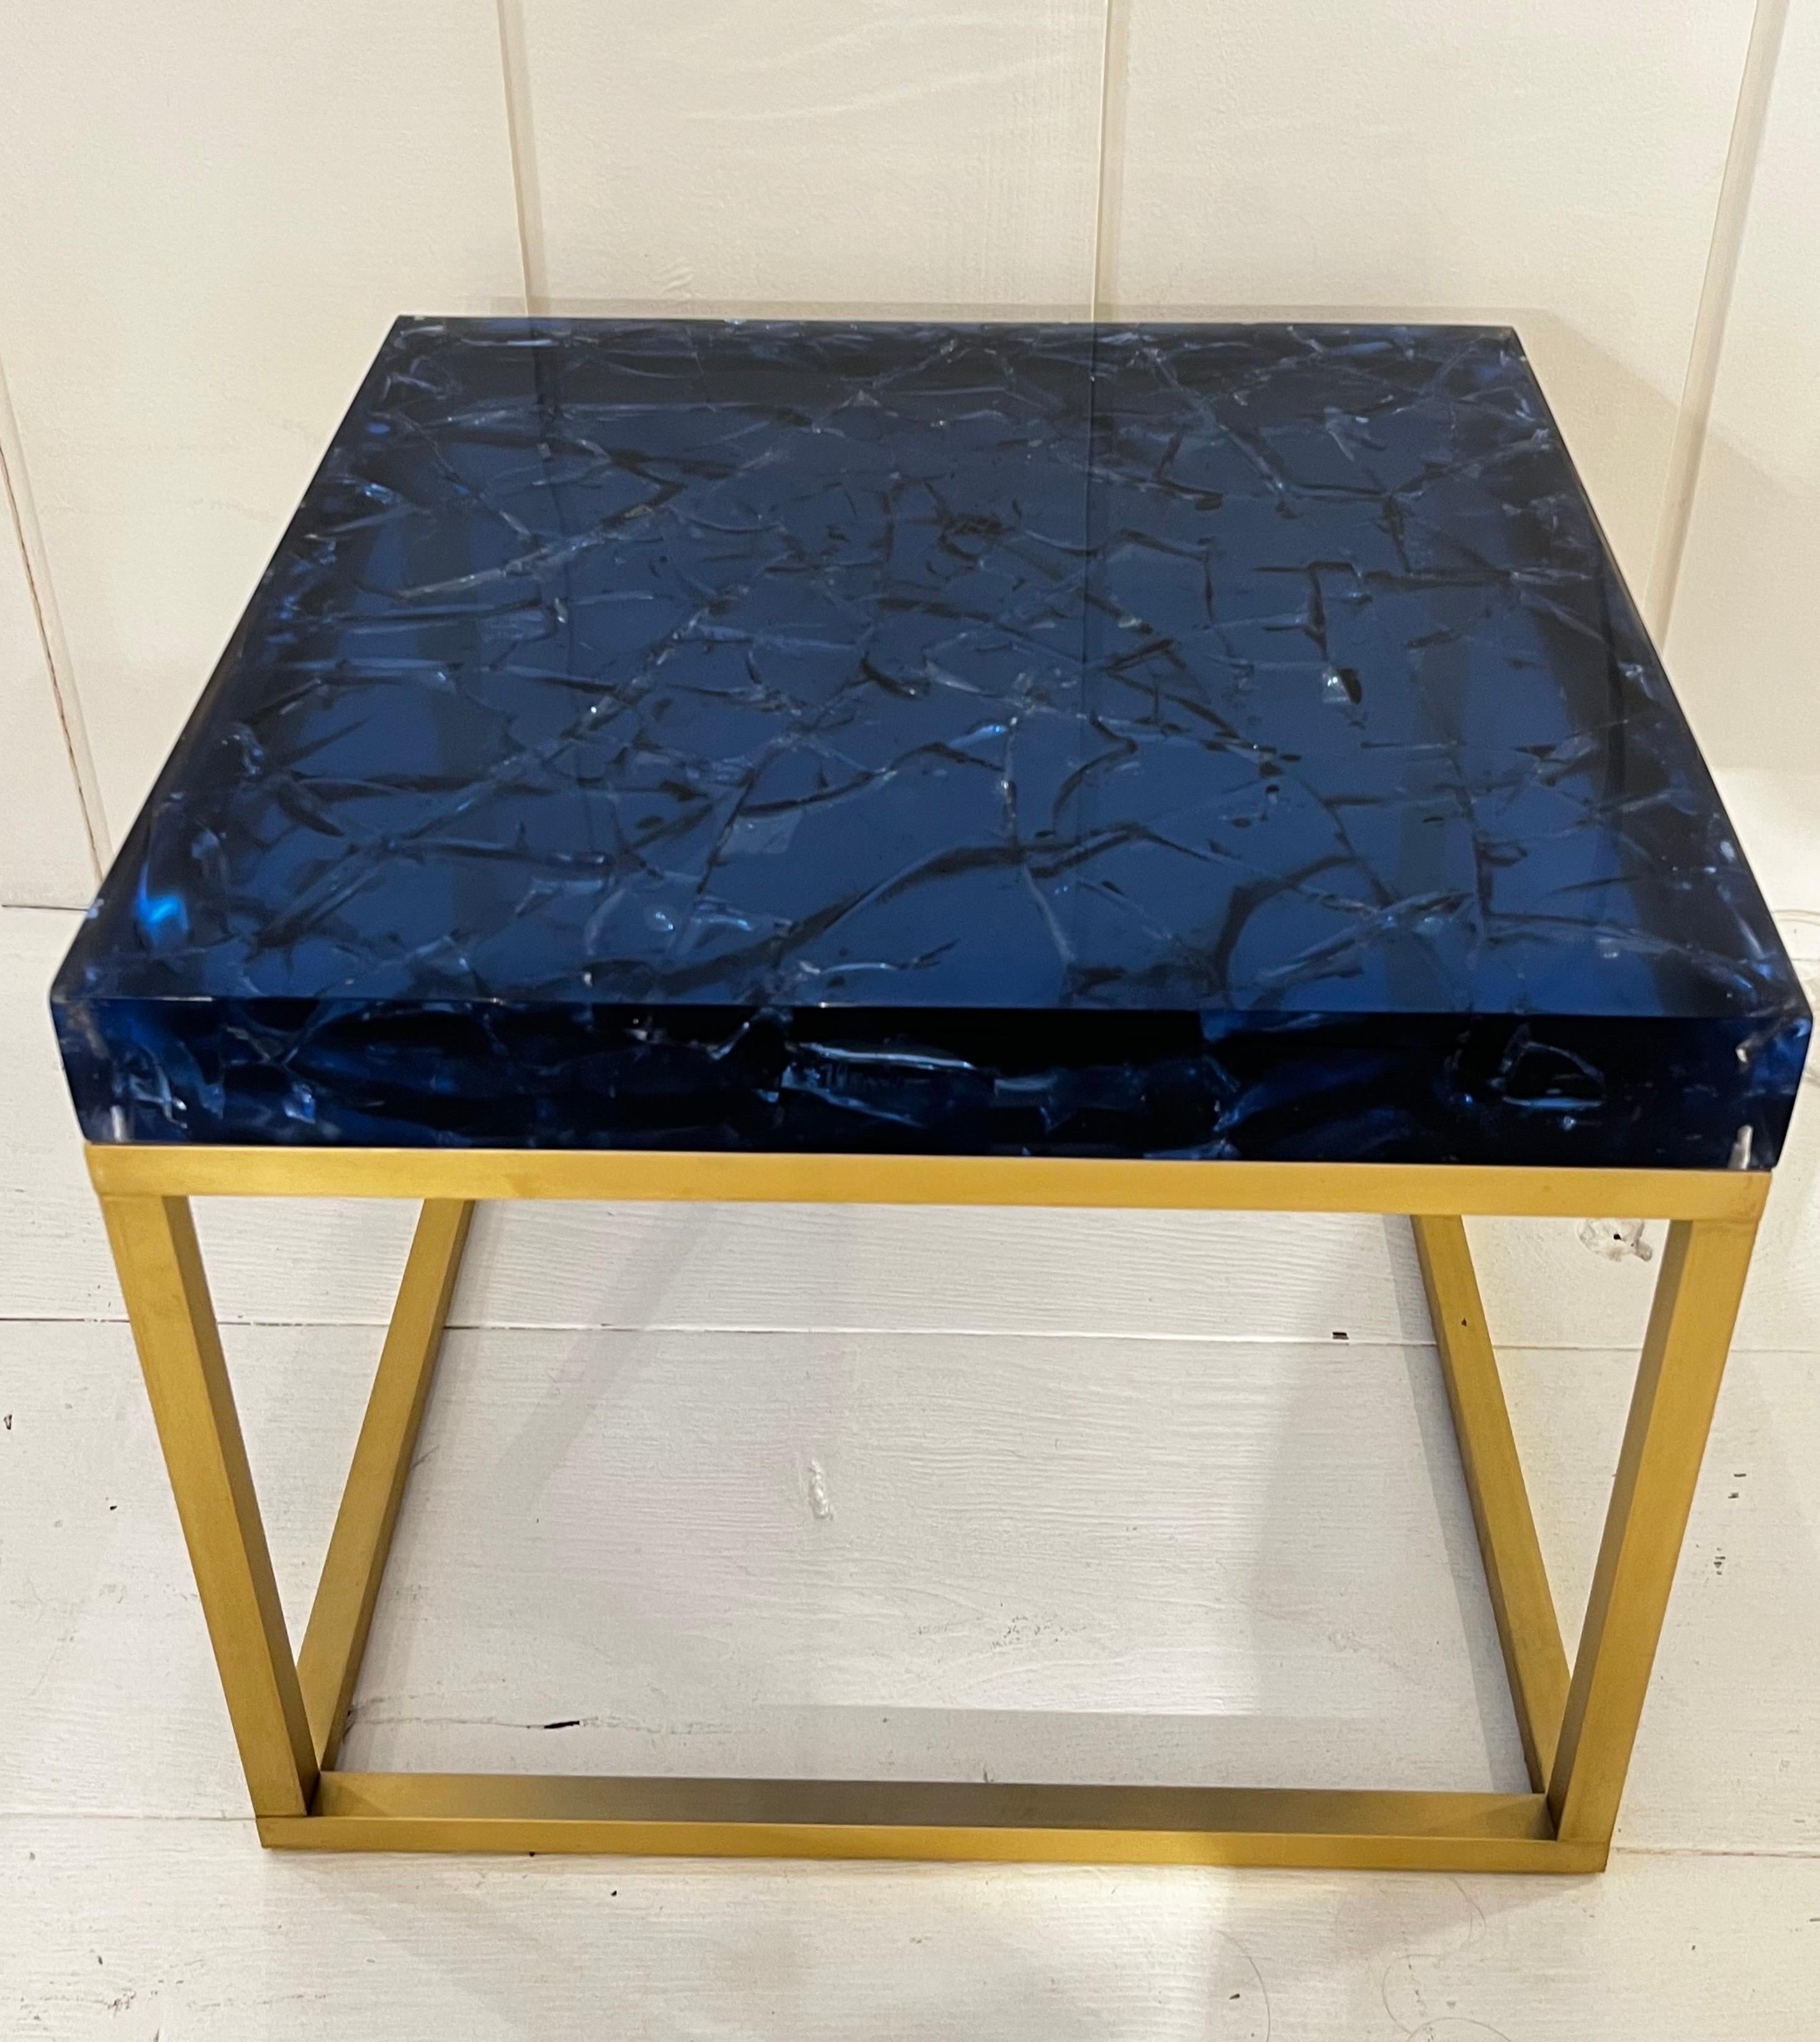 Pair of blue color fractal resin tables
mounted on brass feet
Perfect condition